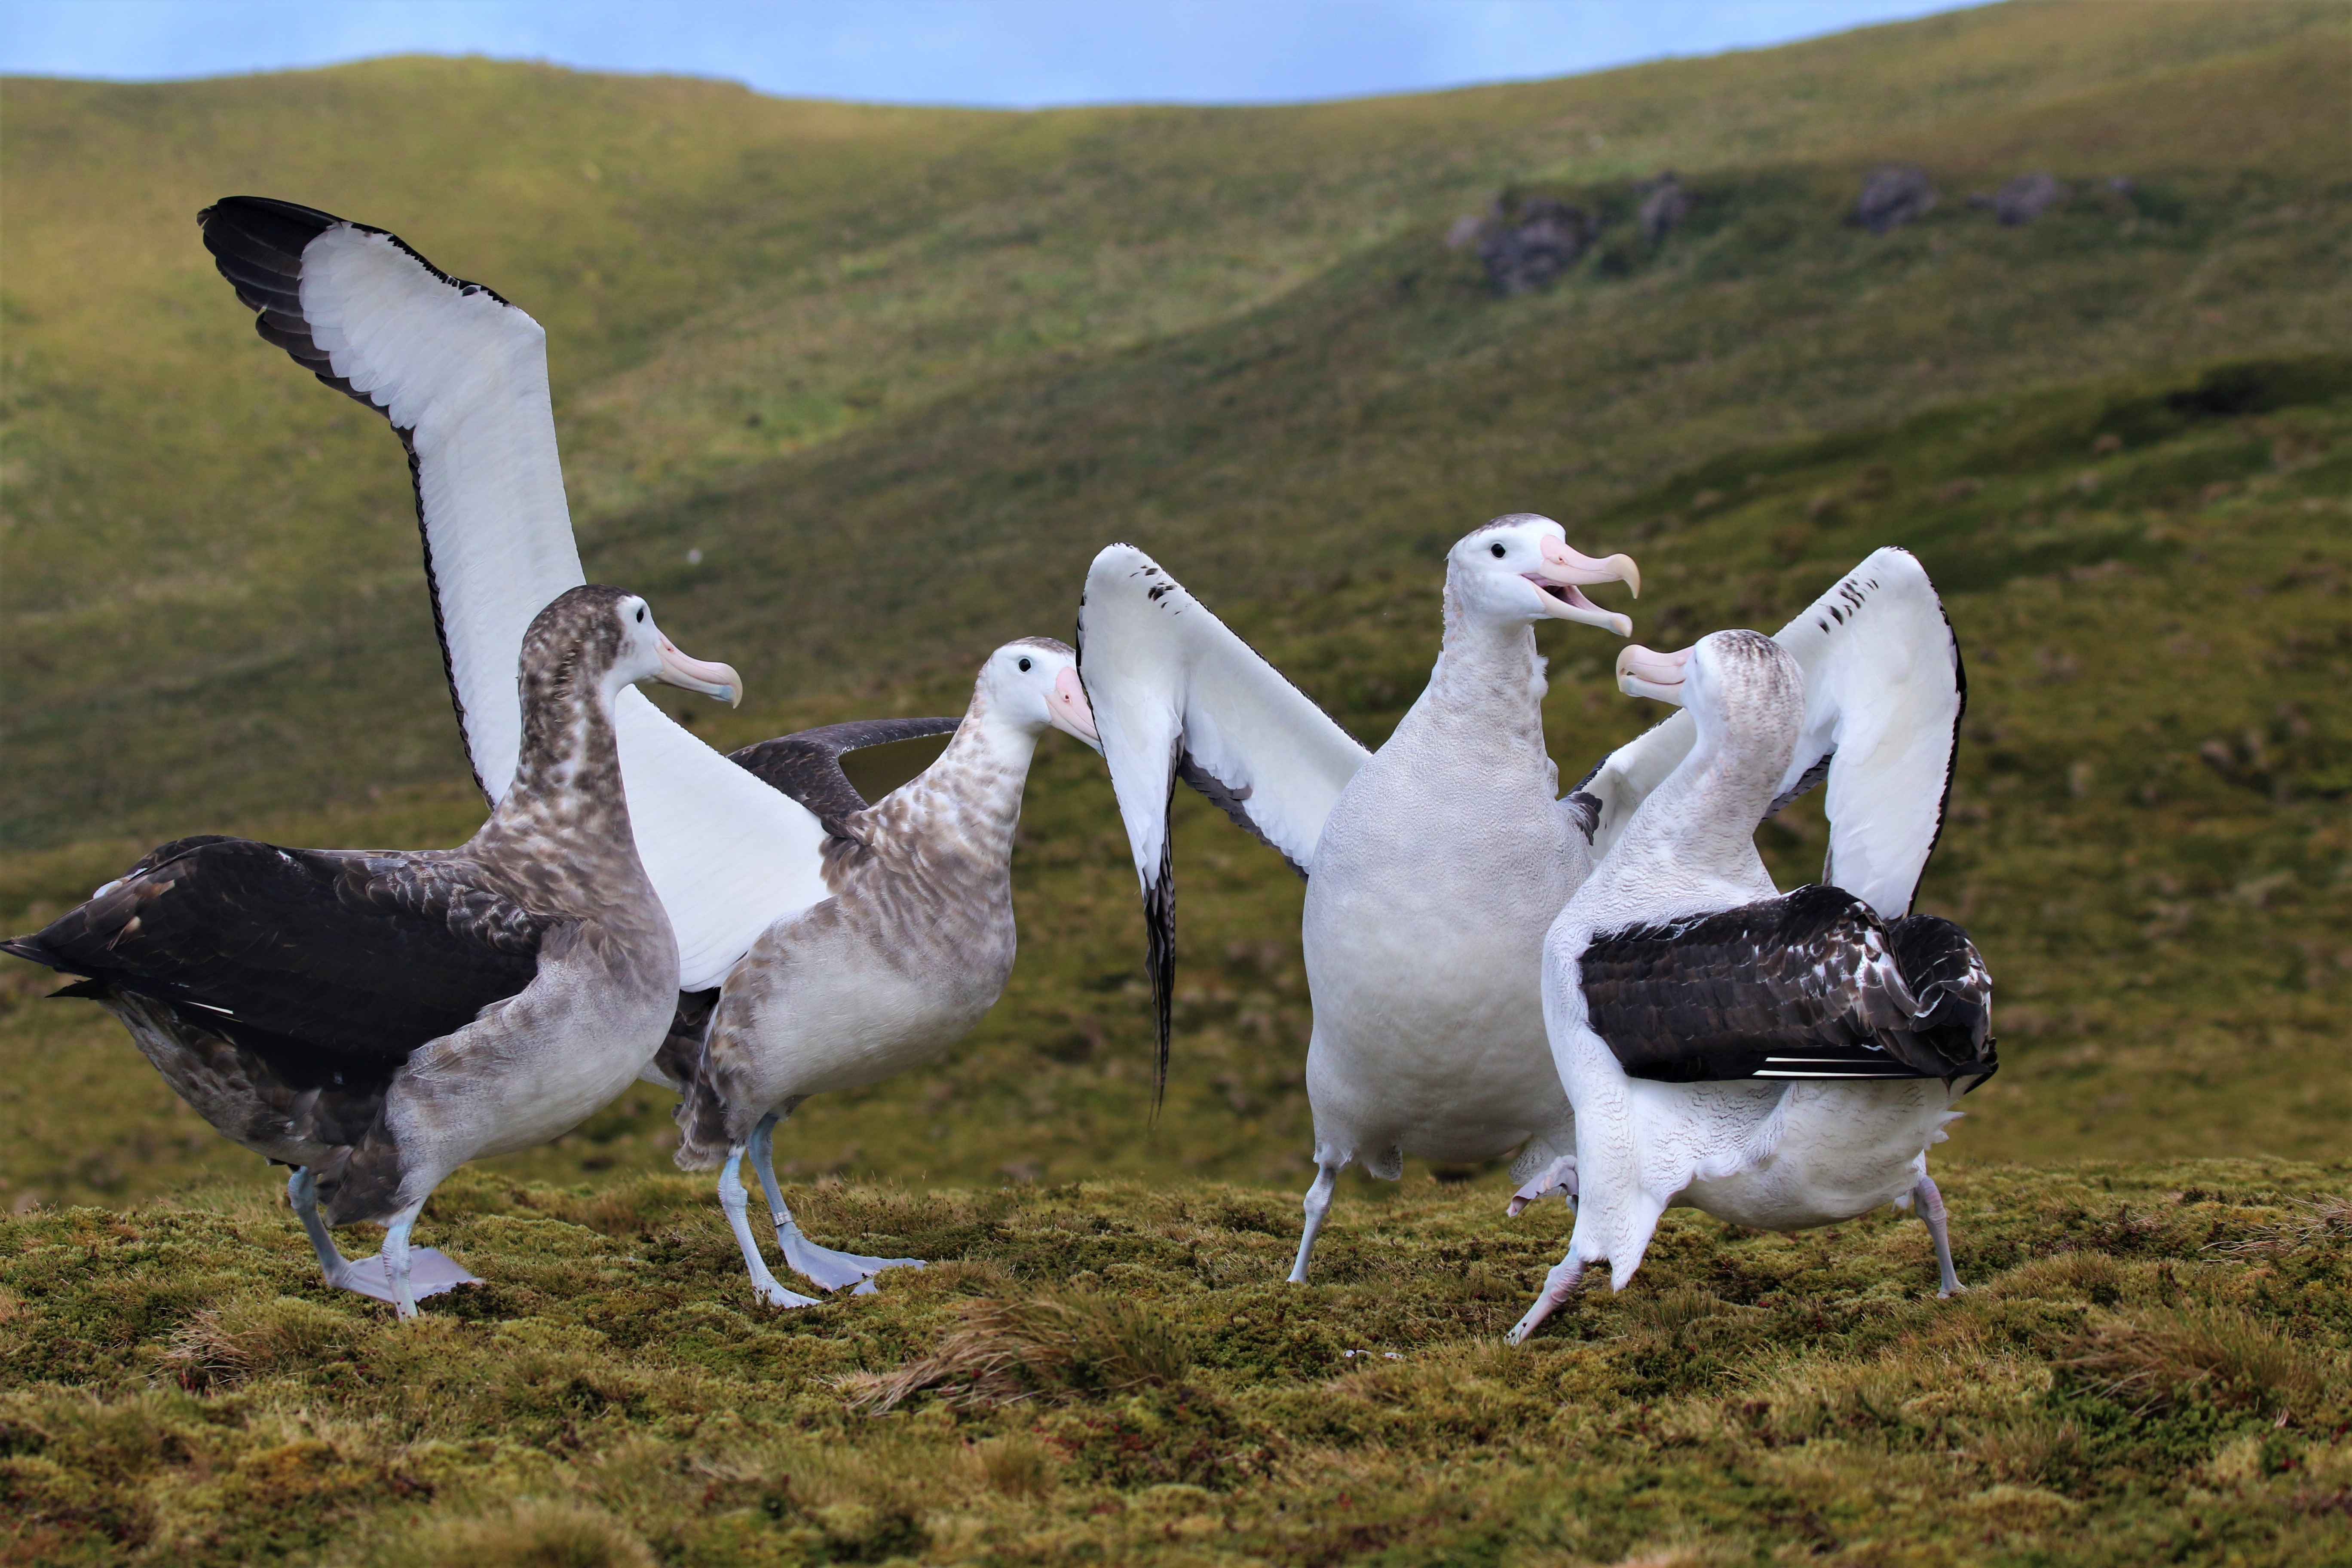 Tristan Albatross are among the birds who make the archipelago their home (Andy Schofield/RSPB Images/PA)